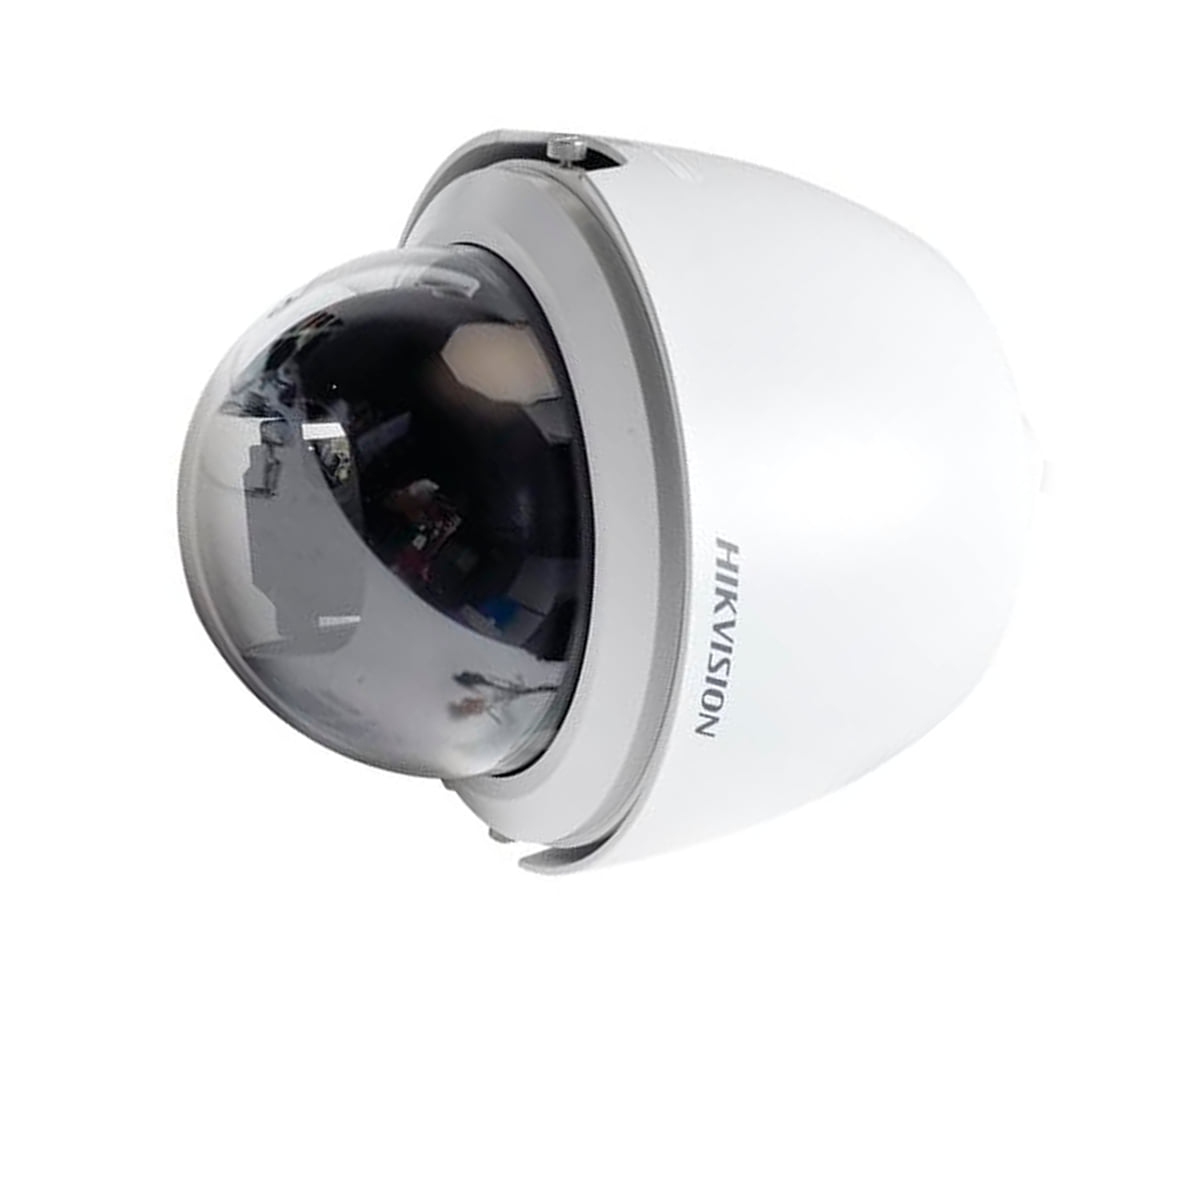 CAMERA-SPEED-DOME-IP-OUTDOOR-PTZ-2MP-30X-DS-2DE5230W-AE_3